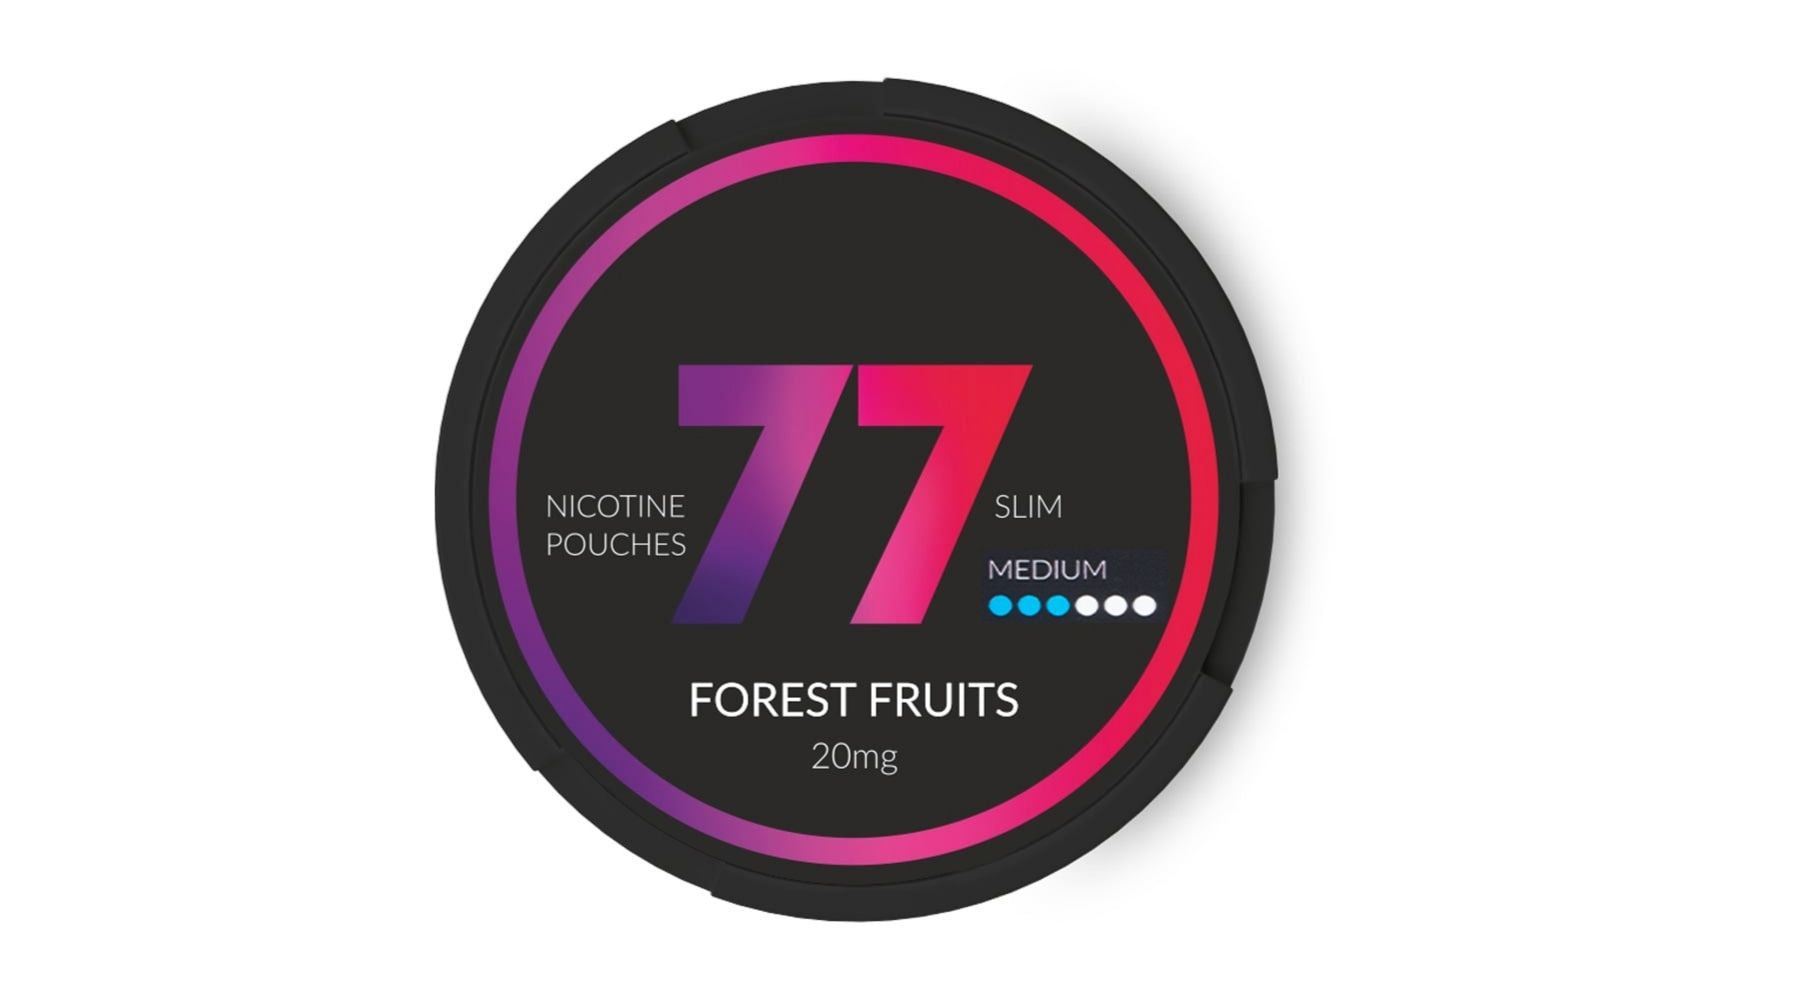 a tin of Forest Fruits 77 nicotine pouches